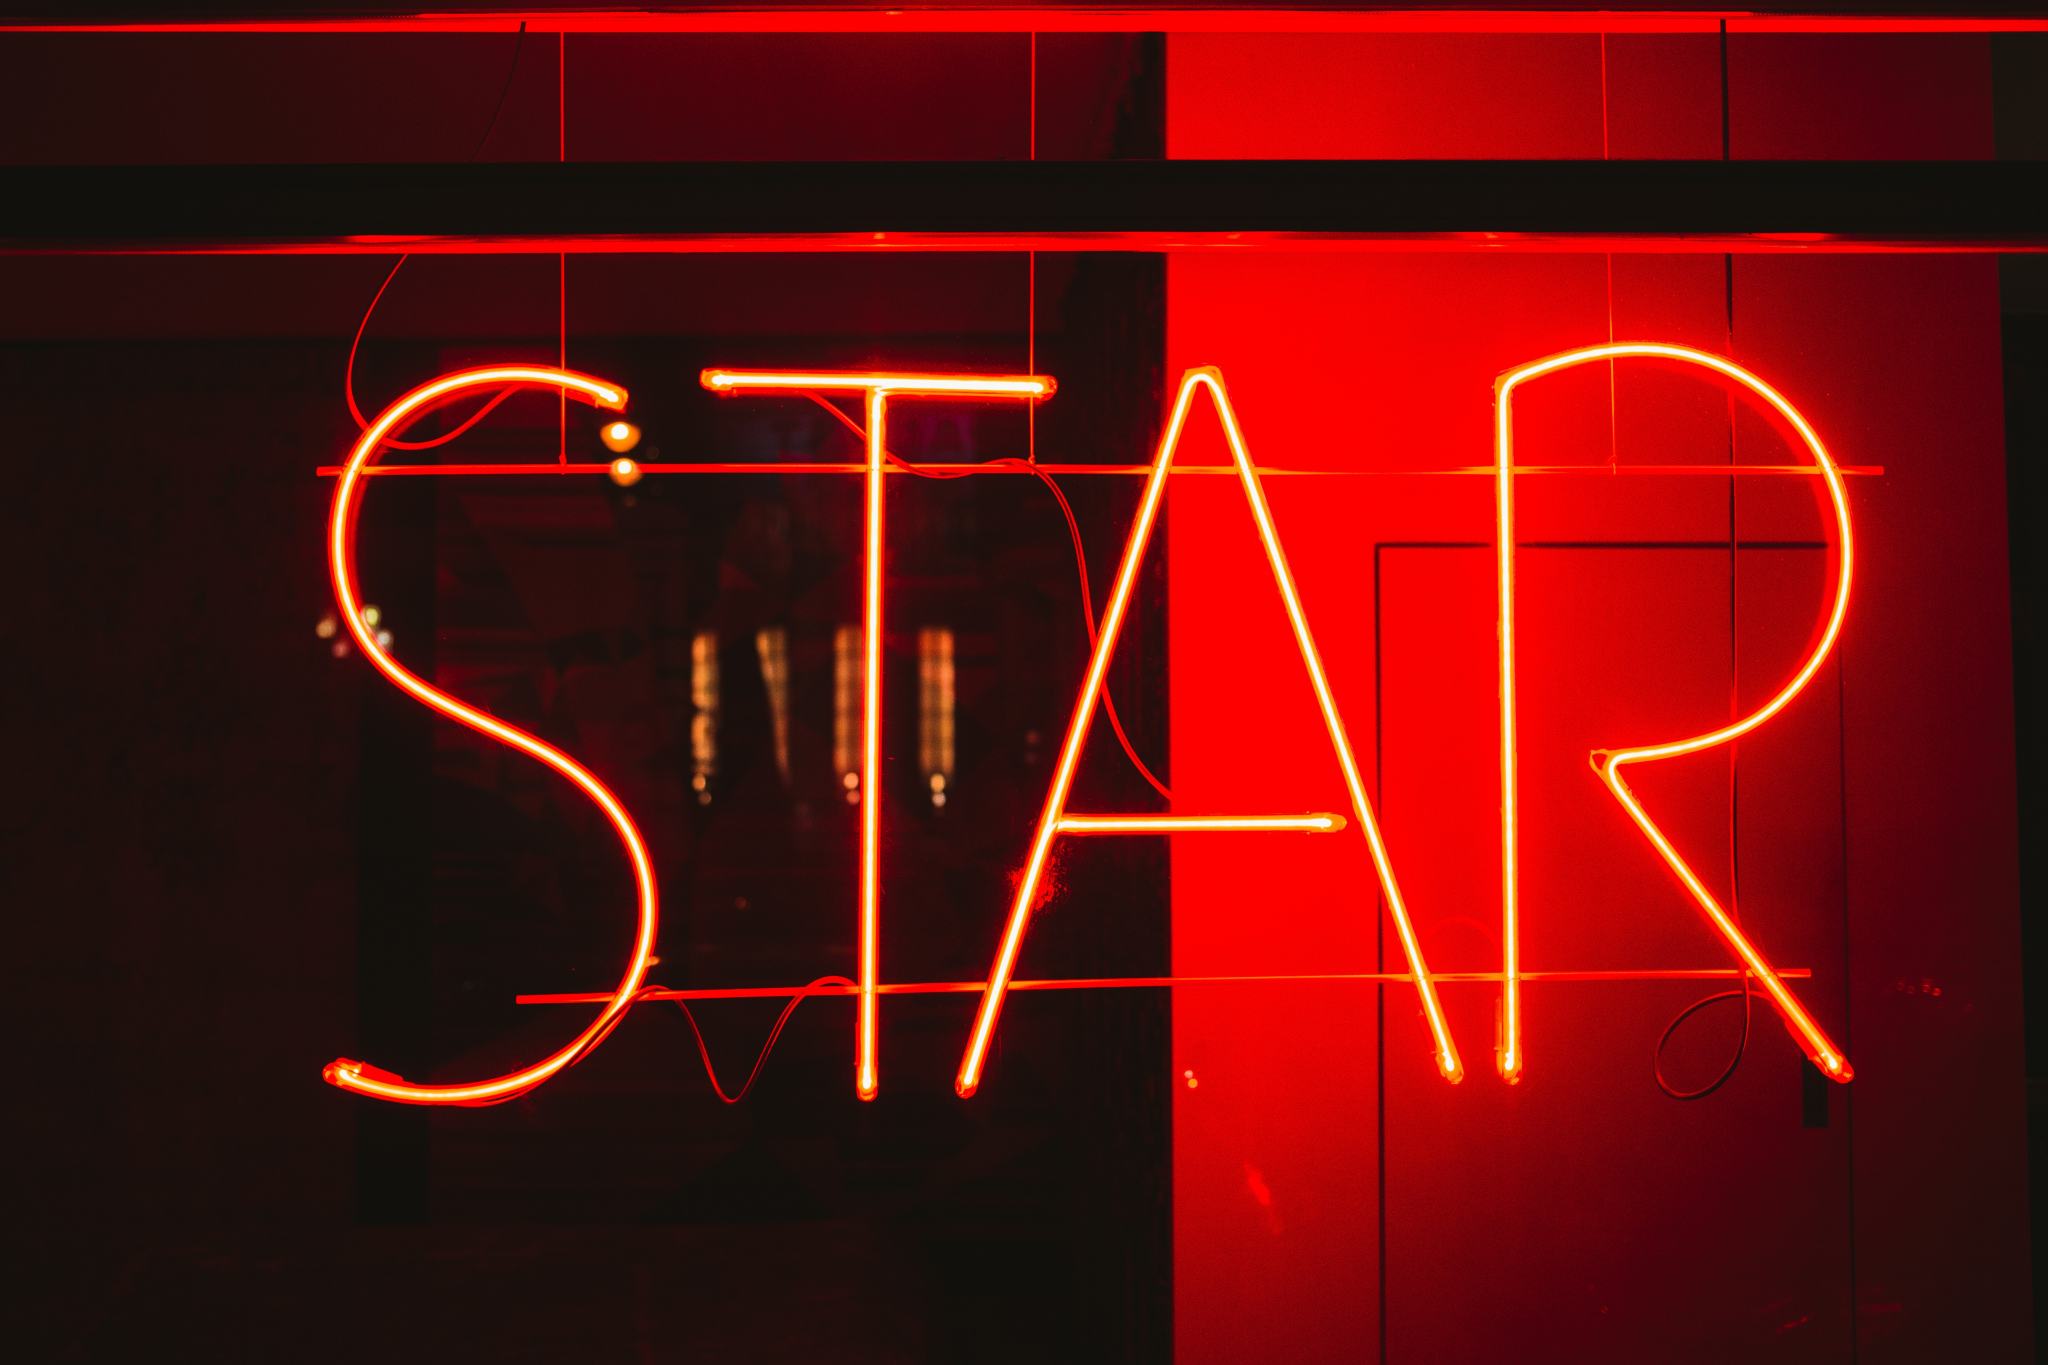 Neon sign showing STAR affirmation